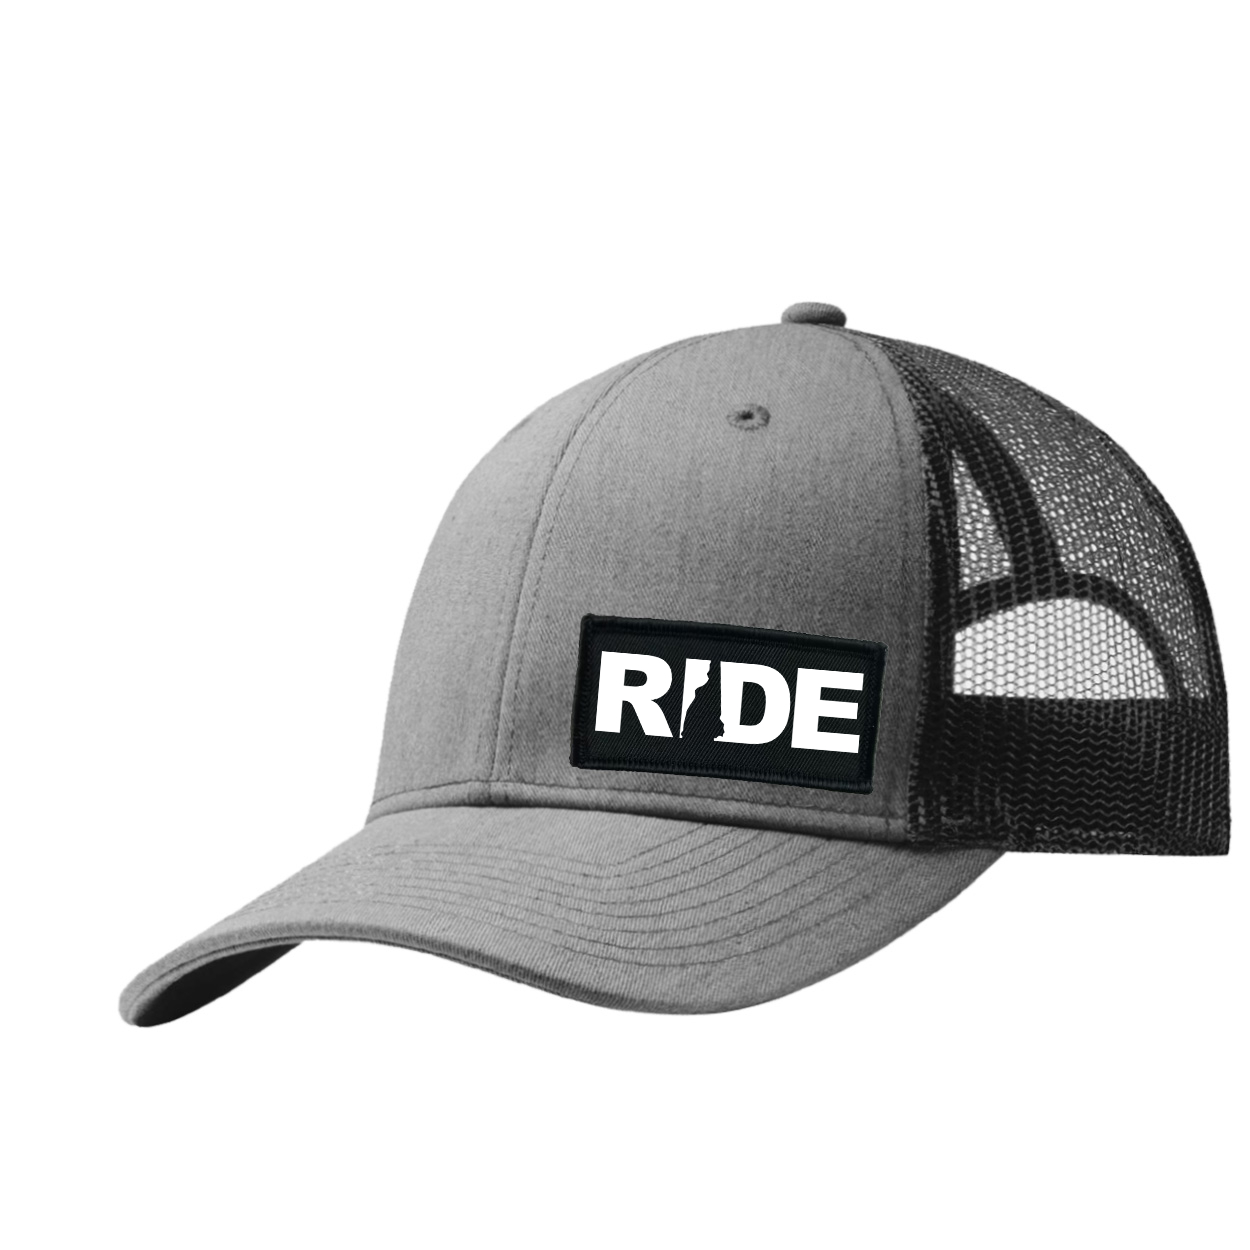 Ride New Hampshire Night Out Woven Patch Snapback Trucker Hat Heather Gray/Black (White Logo)